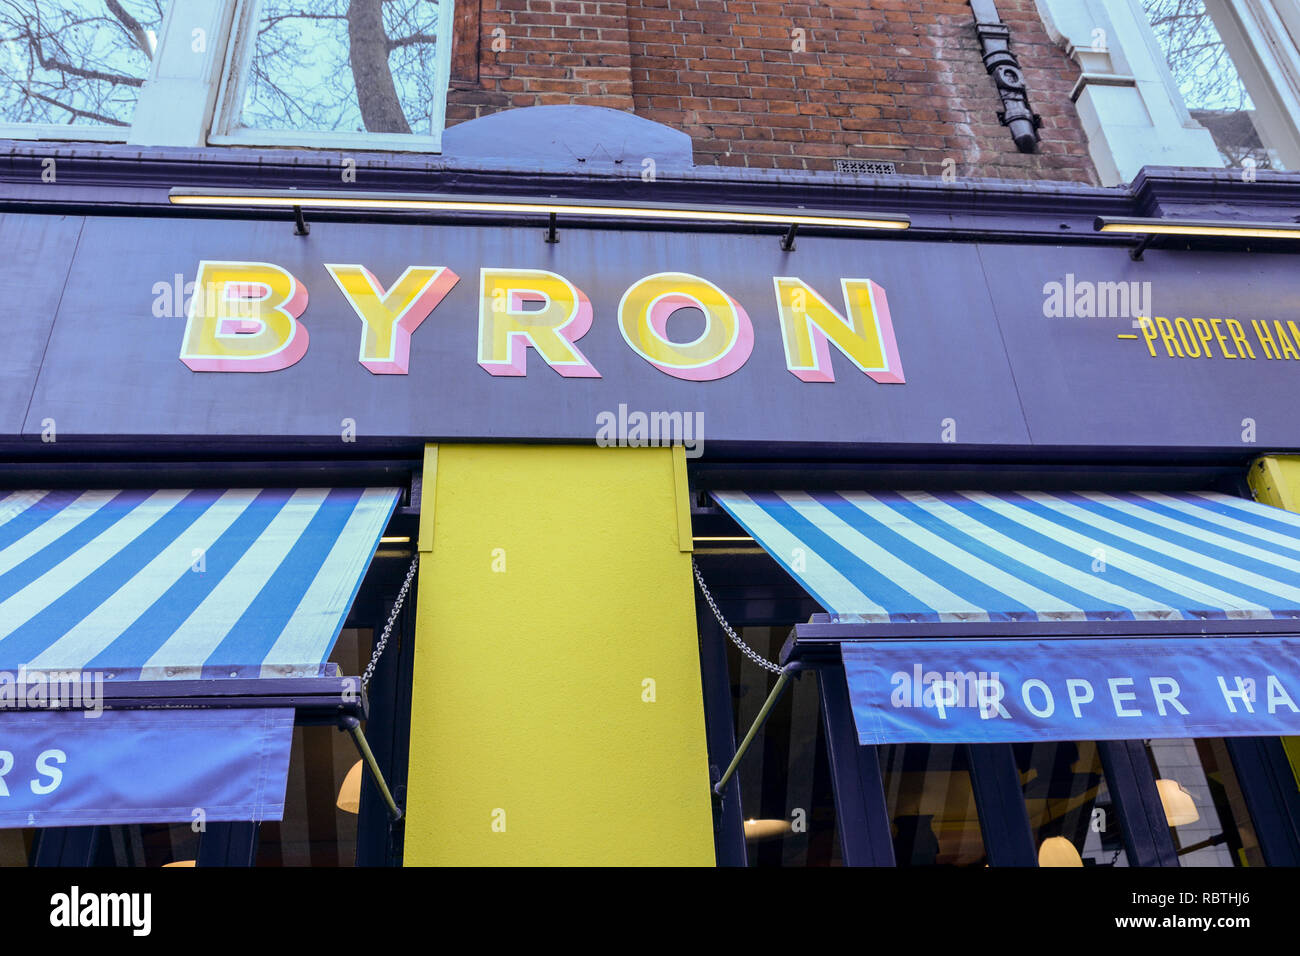 Byron Leicester Square, Charing Cross Road, London, WC2, UK Stock Photo